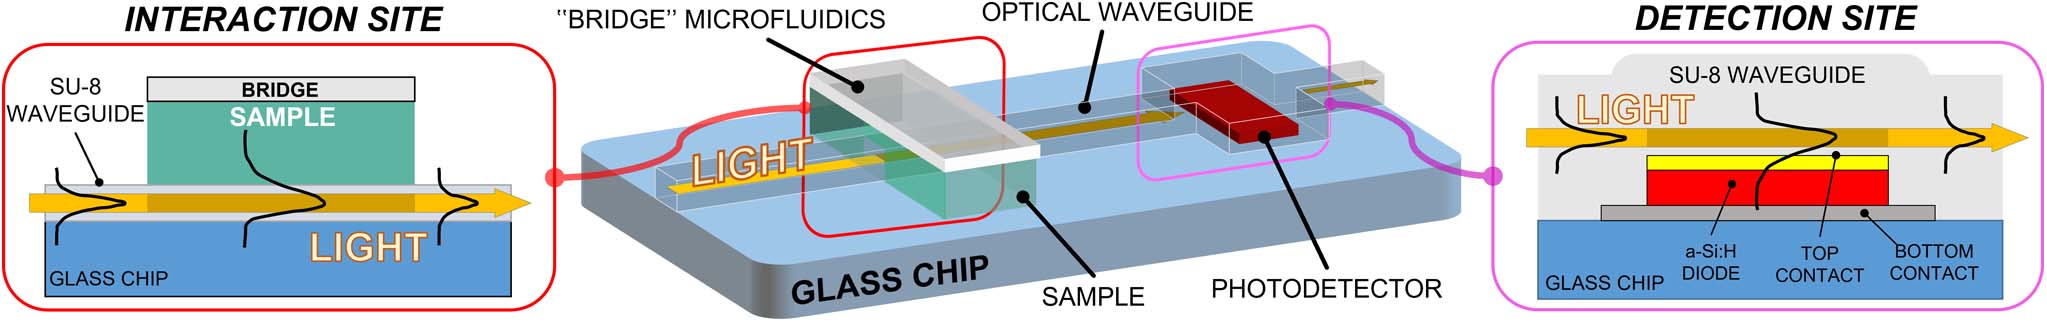 Evanescent waveguide lab-on-chip basic structure, with two sectioned insights on the sample–waveguide interaction site (left side) and on the waveguide–photosensor detection site (right site).